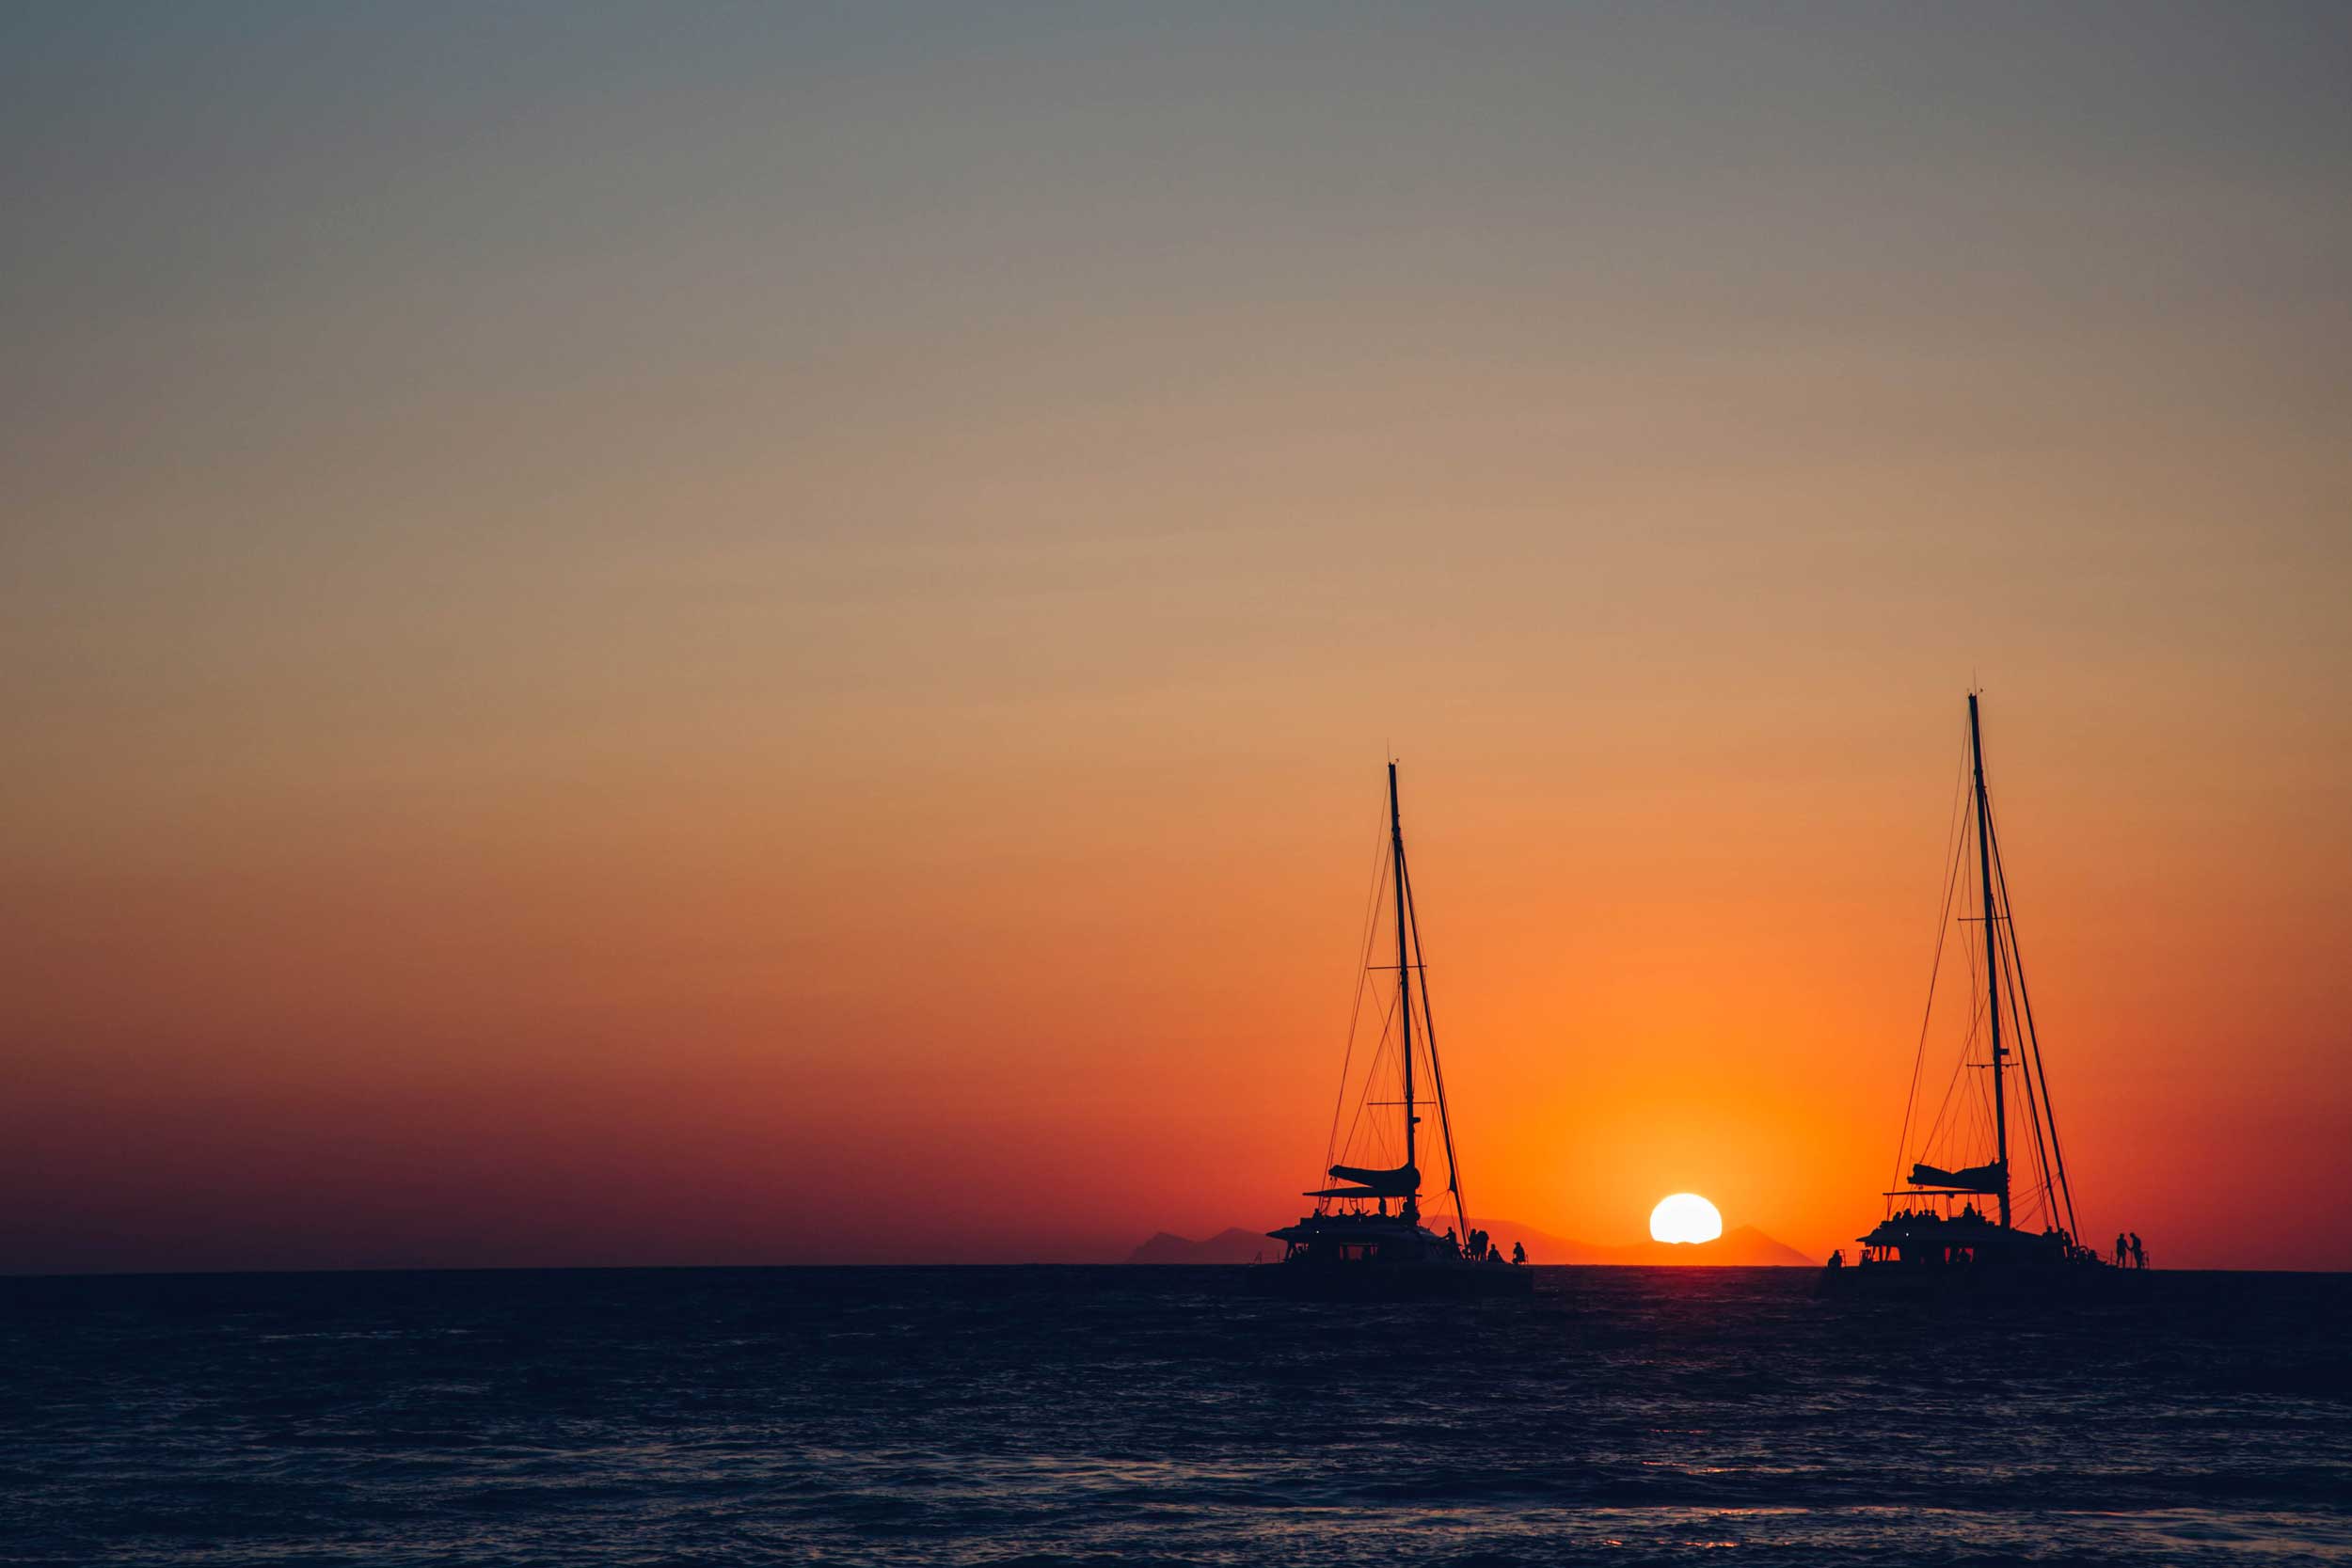 Two sailboats, sails down, silhouetted against a dark sea and orange tinted sky in Santorini, Greece